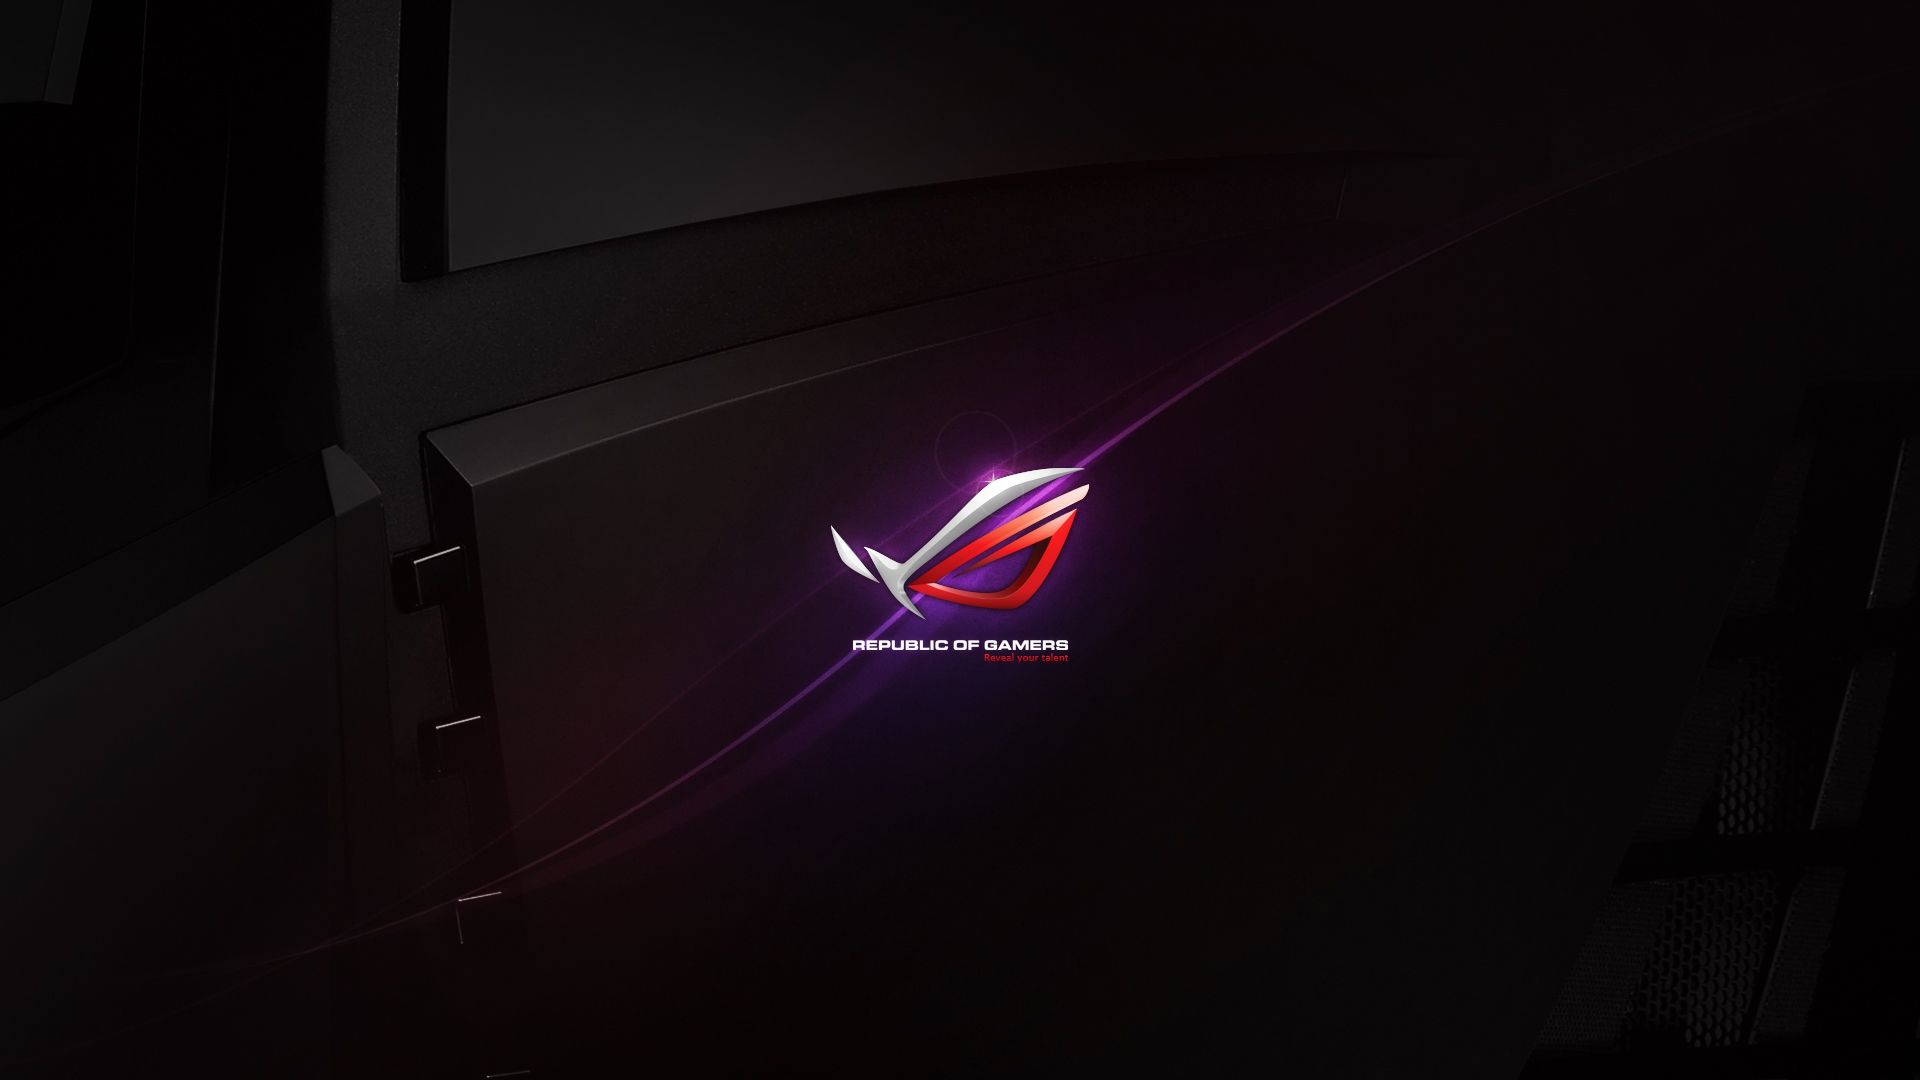 Asus Rog Free Wallpapers mine in 2019 Widescreen wallpaper